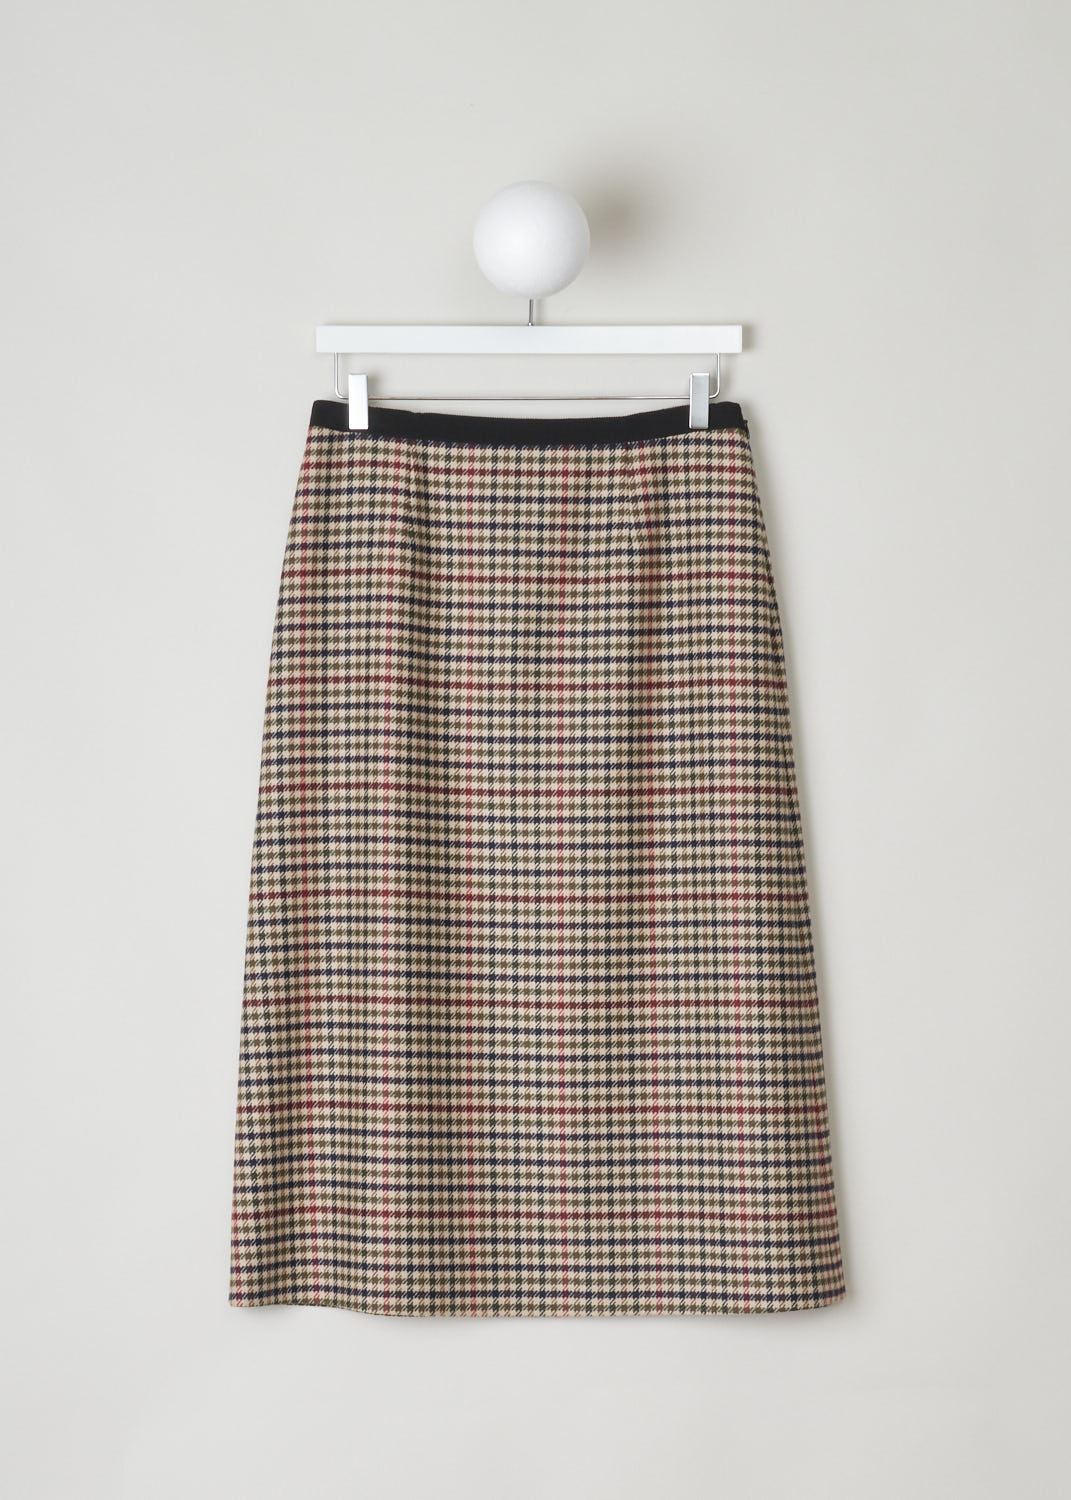 PRADA, CHECKED A-LINE MIDI SKIRT, PANNO_FANTASIA_P184R_1XF9_BLEU, Red, Brown, Print, Front, Beautiful argyle midi skirt in browns and reds. This A-line skirt has a contrasting black trim along the waist. That same trim can be found in the back, decorating the patch pocket. Also on the patch pocket, a triangle Prada logo can be found in leather. This skirt has a concealed zipper closure in the side seam. In the back, a centre slit can be found.